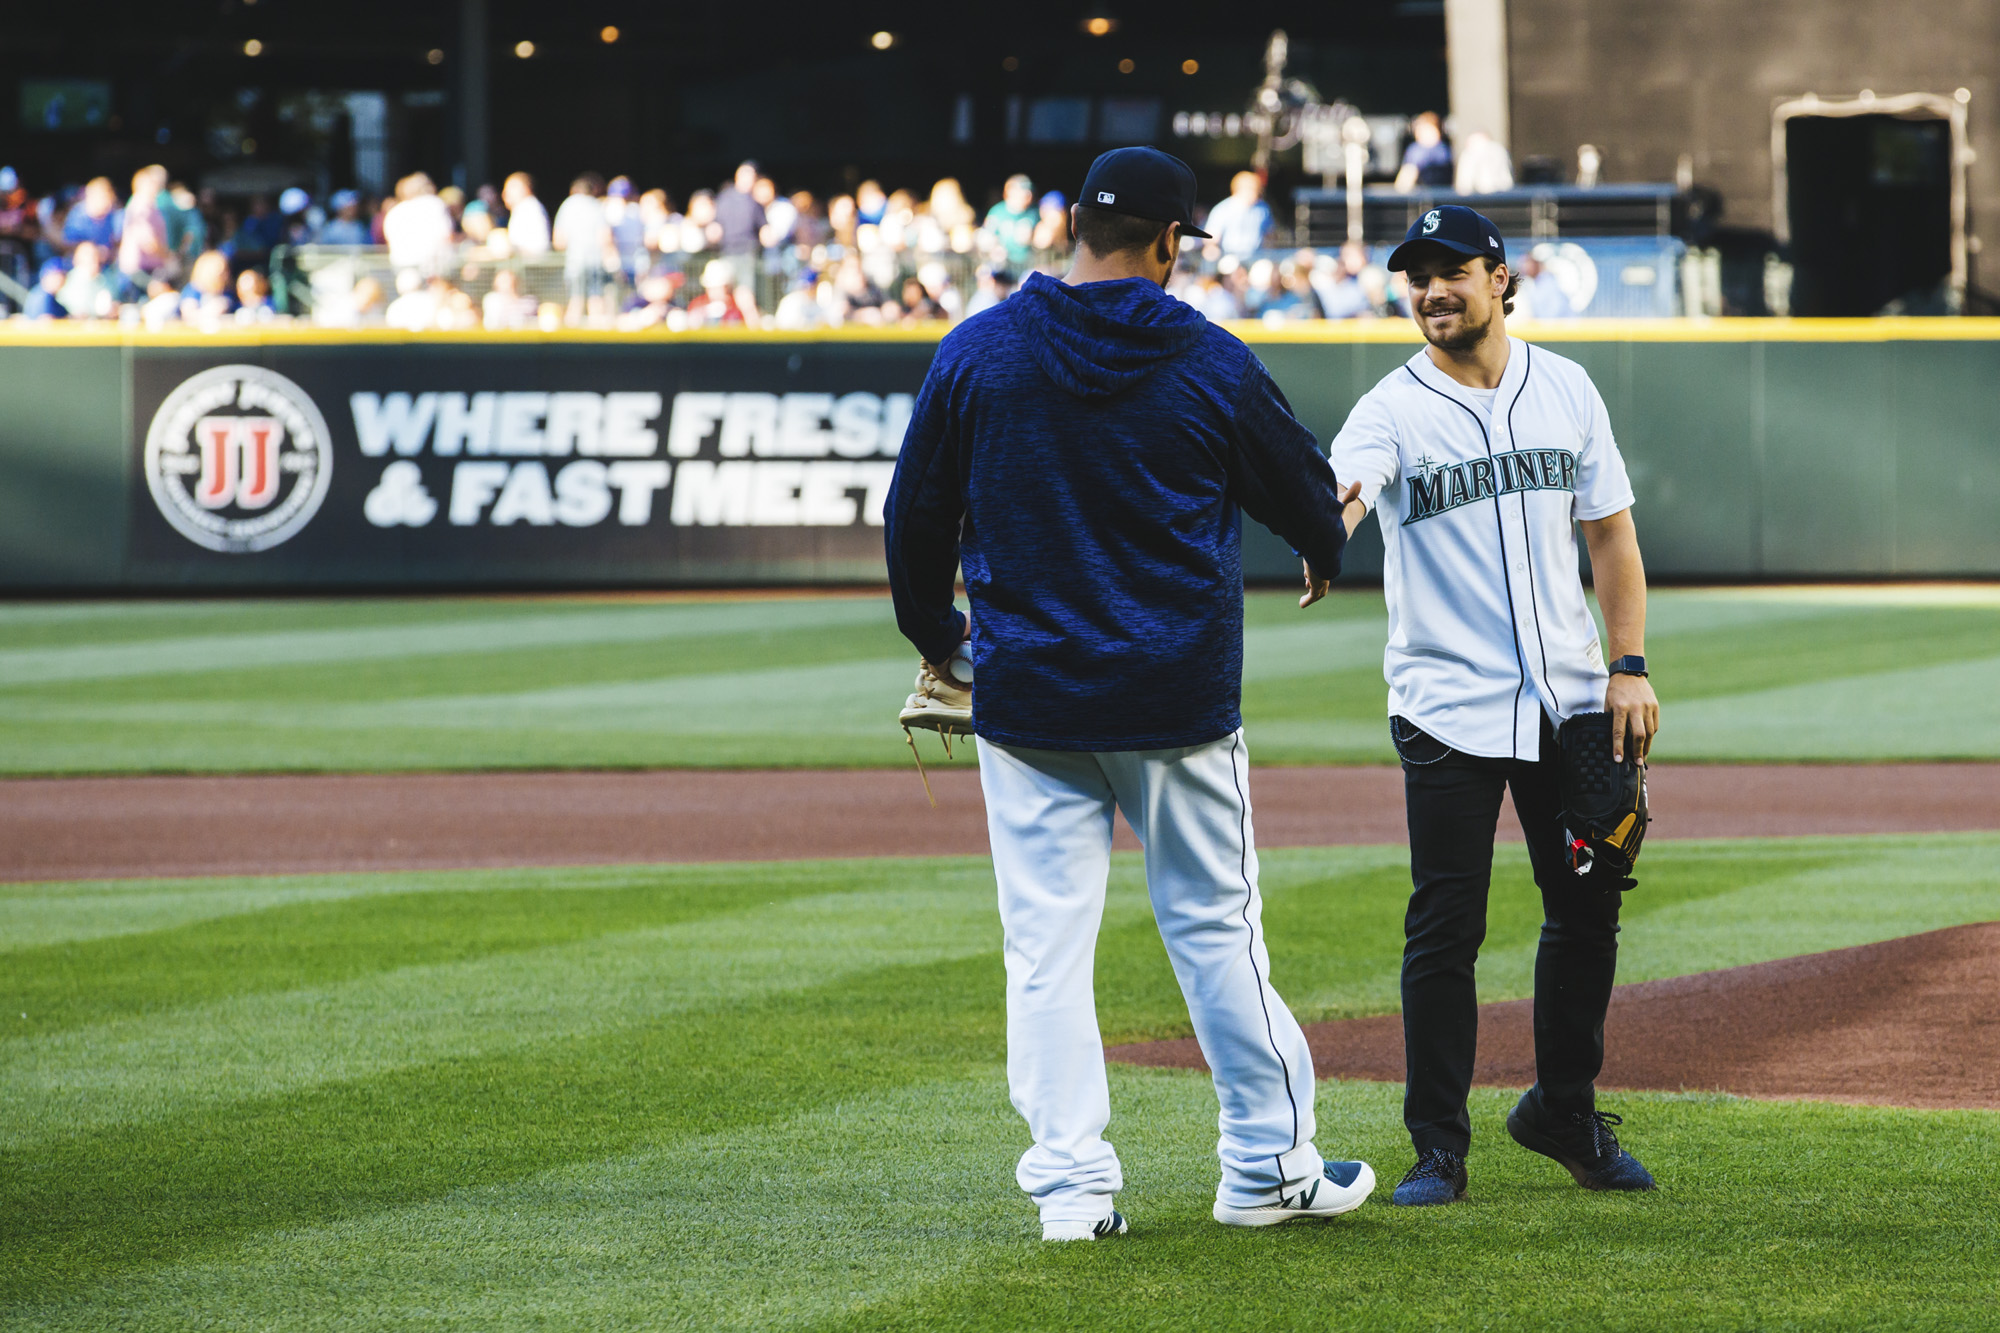 Photos: 'Grey's Anatomy' cast throw first pitch at Safeco Field | Seattle Refined2000 x 1333